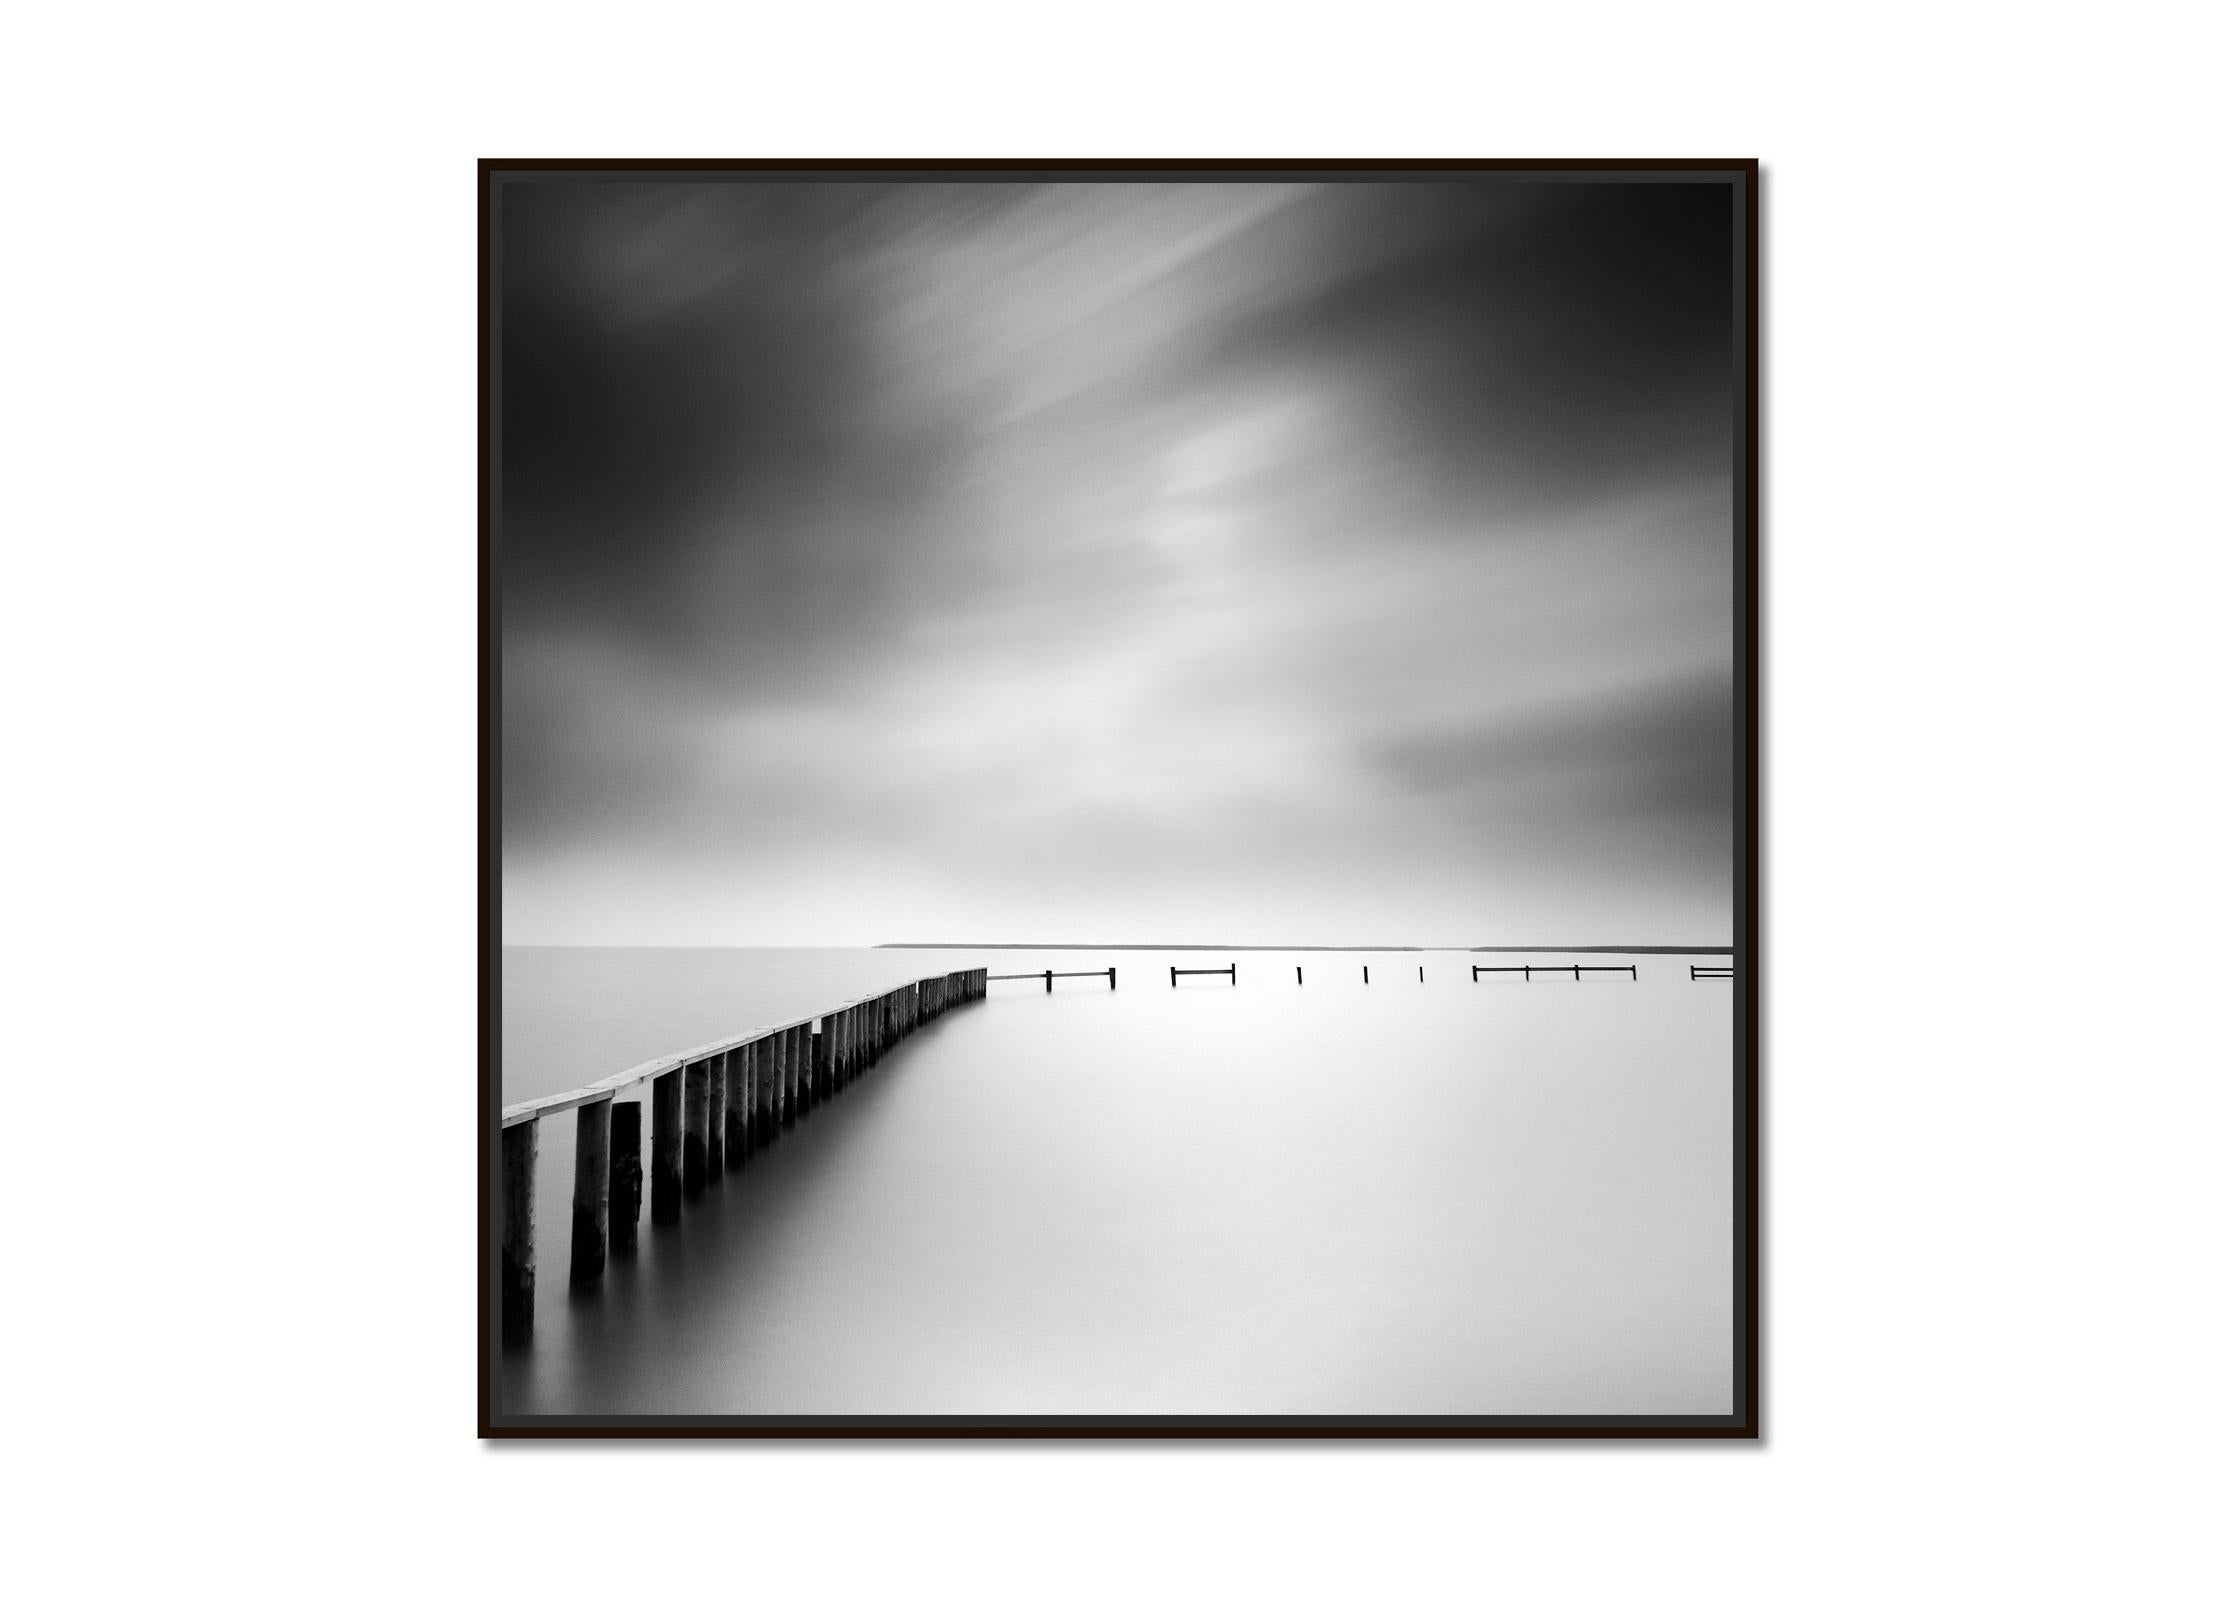 Swimming Area, long exposure waterscape, black and white landscape photography - Photograph by Gerald Berghammer